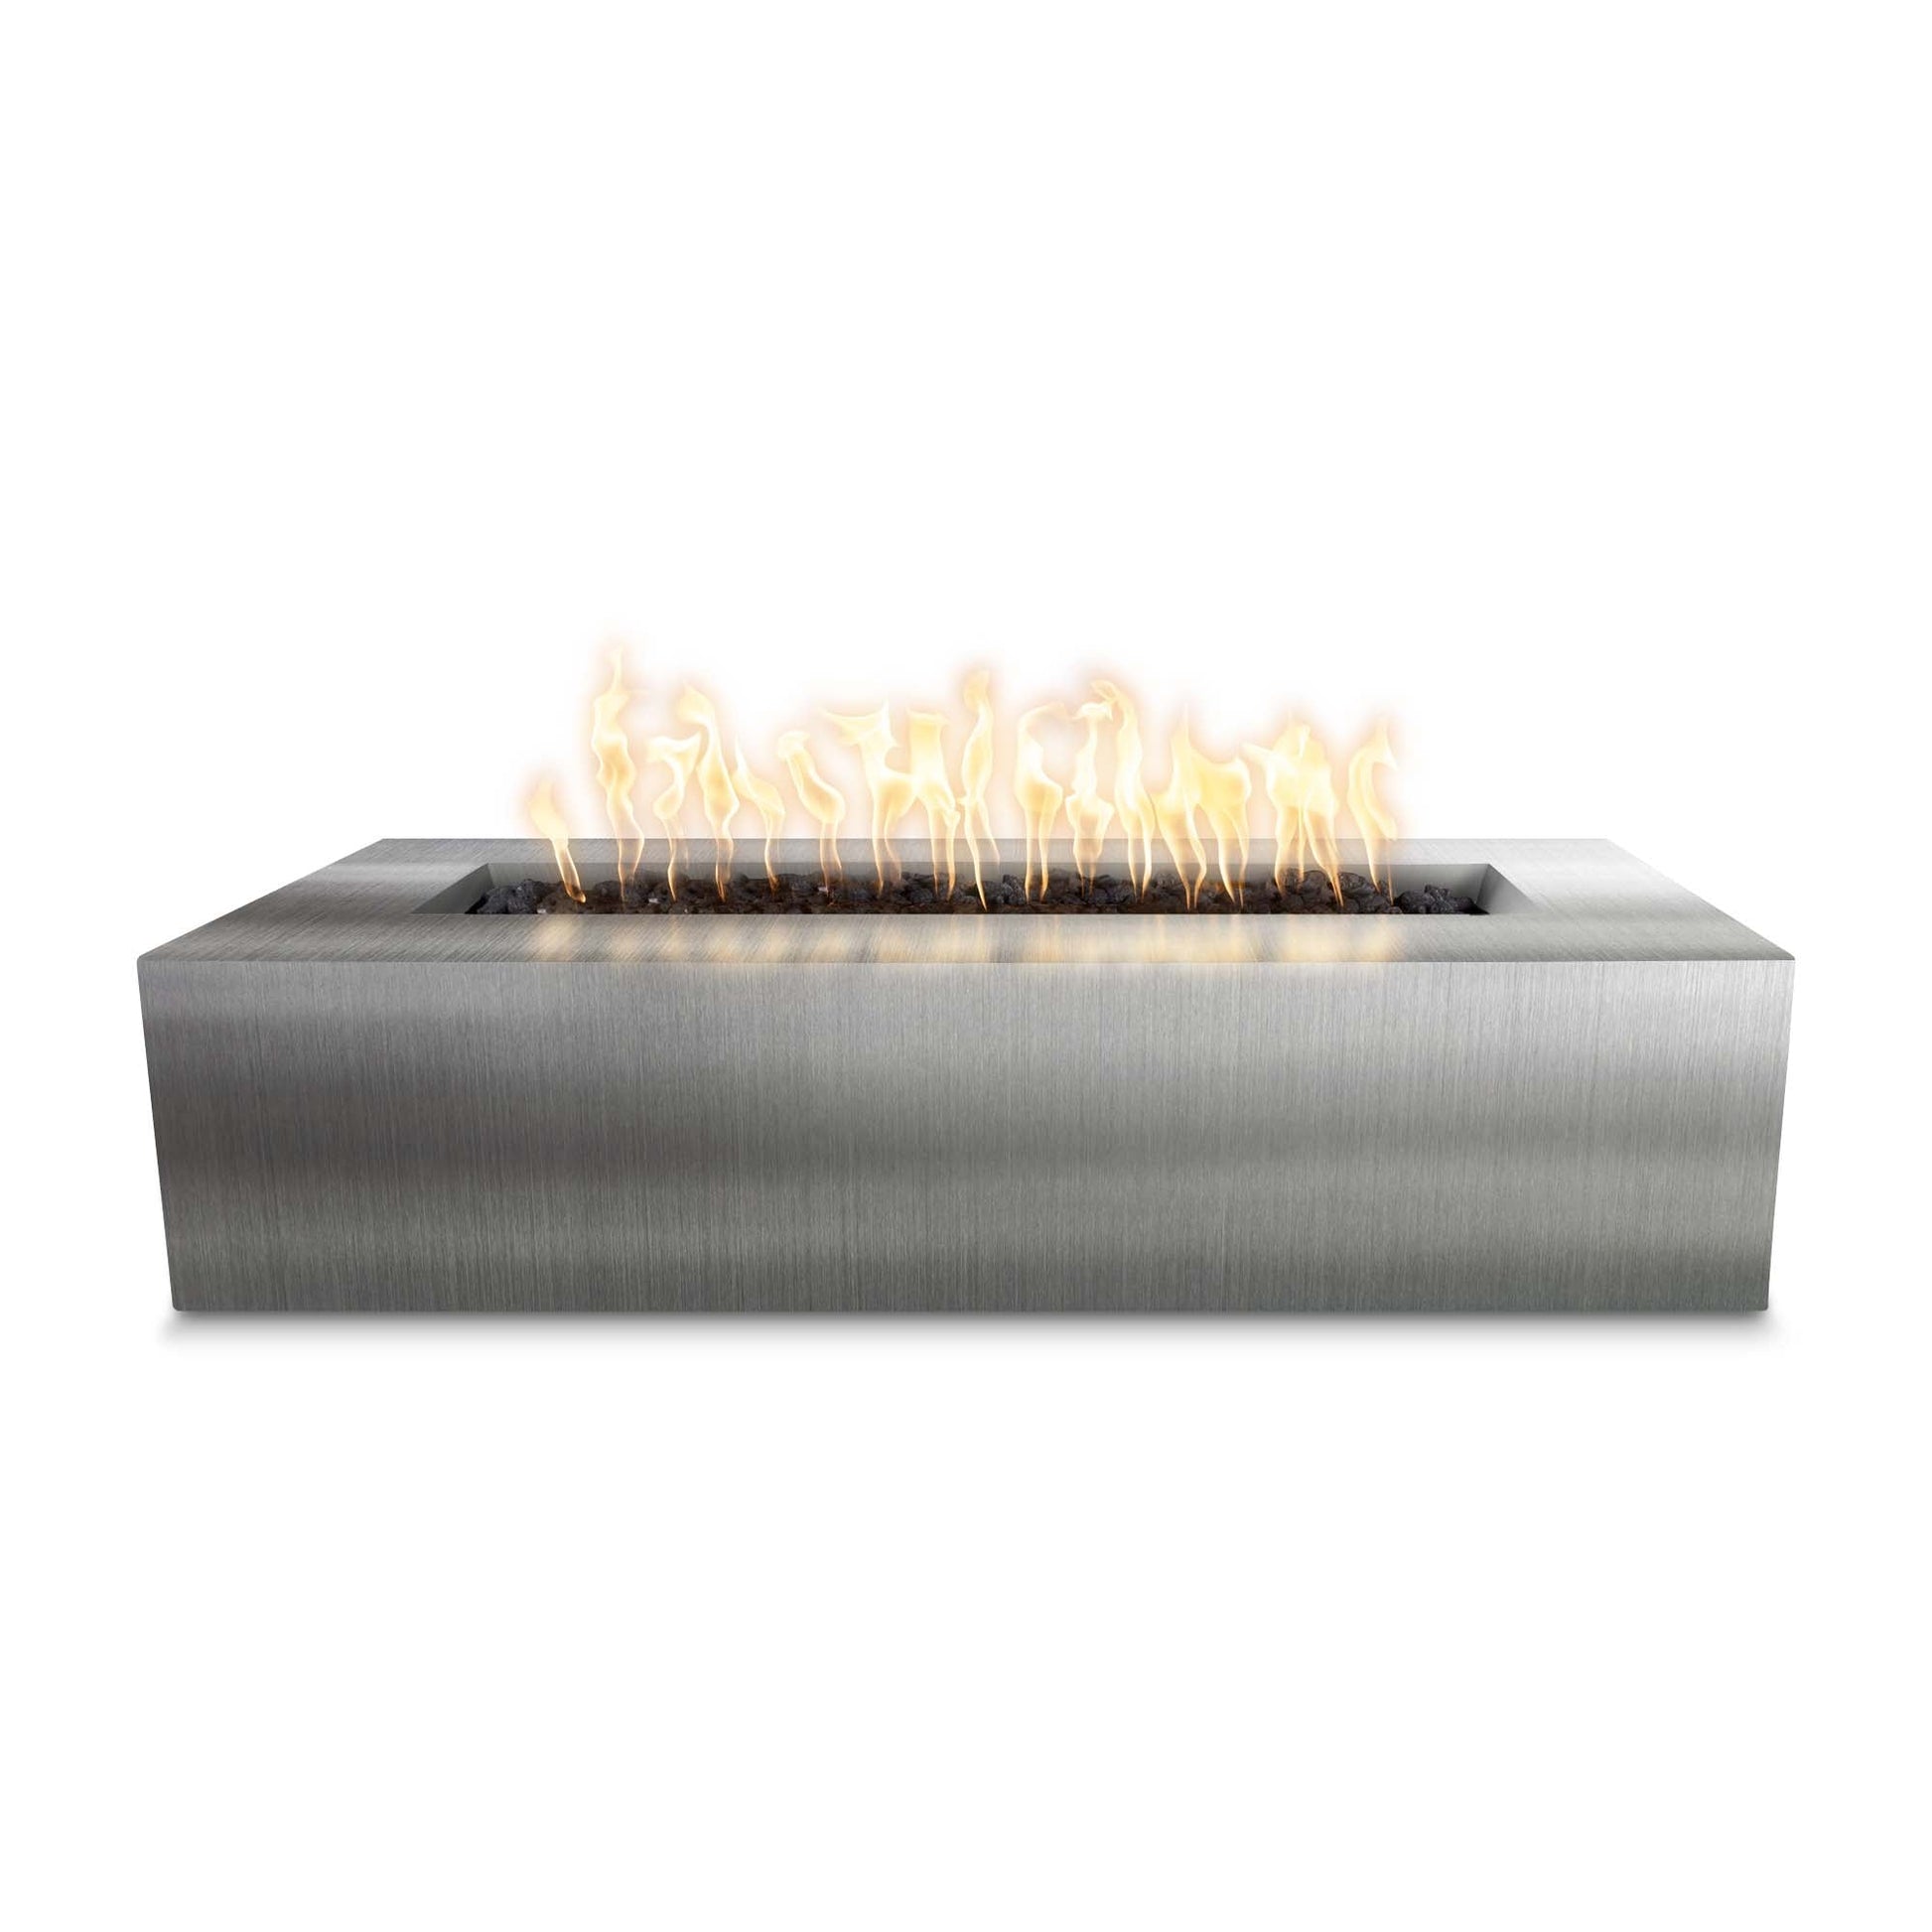 The Outdoor Plus Rectangular Regal 48" Hammered Copper Liquid Propane Fire Pit with 12V Electronic Ignition